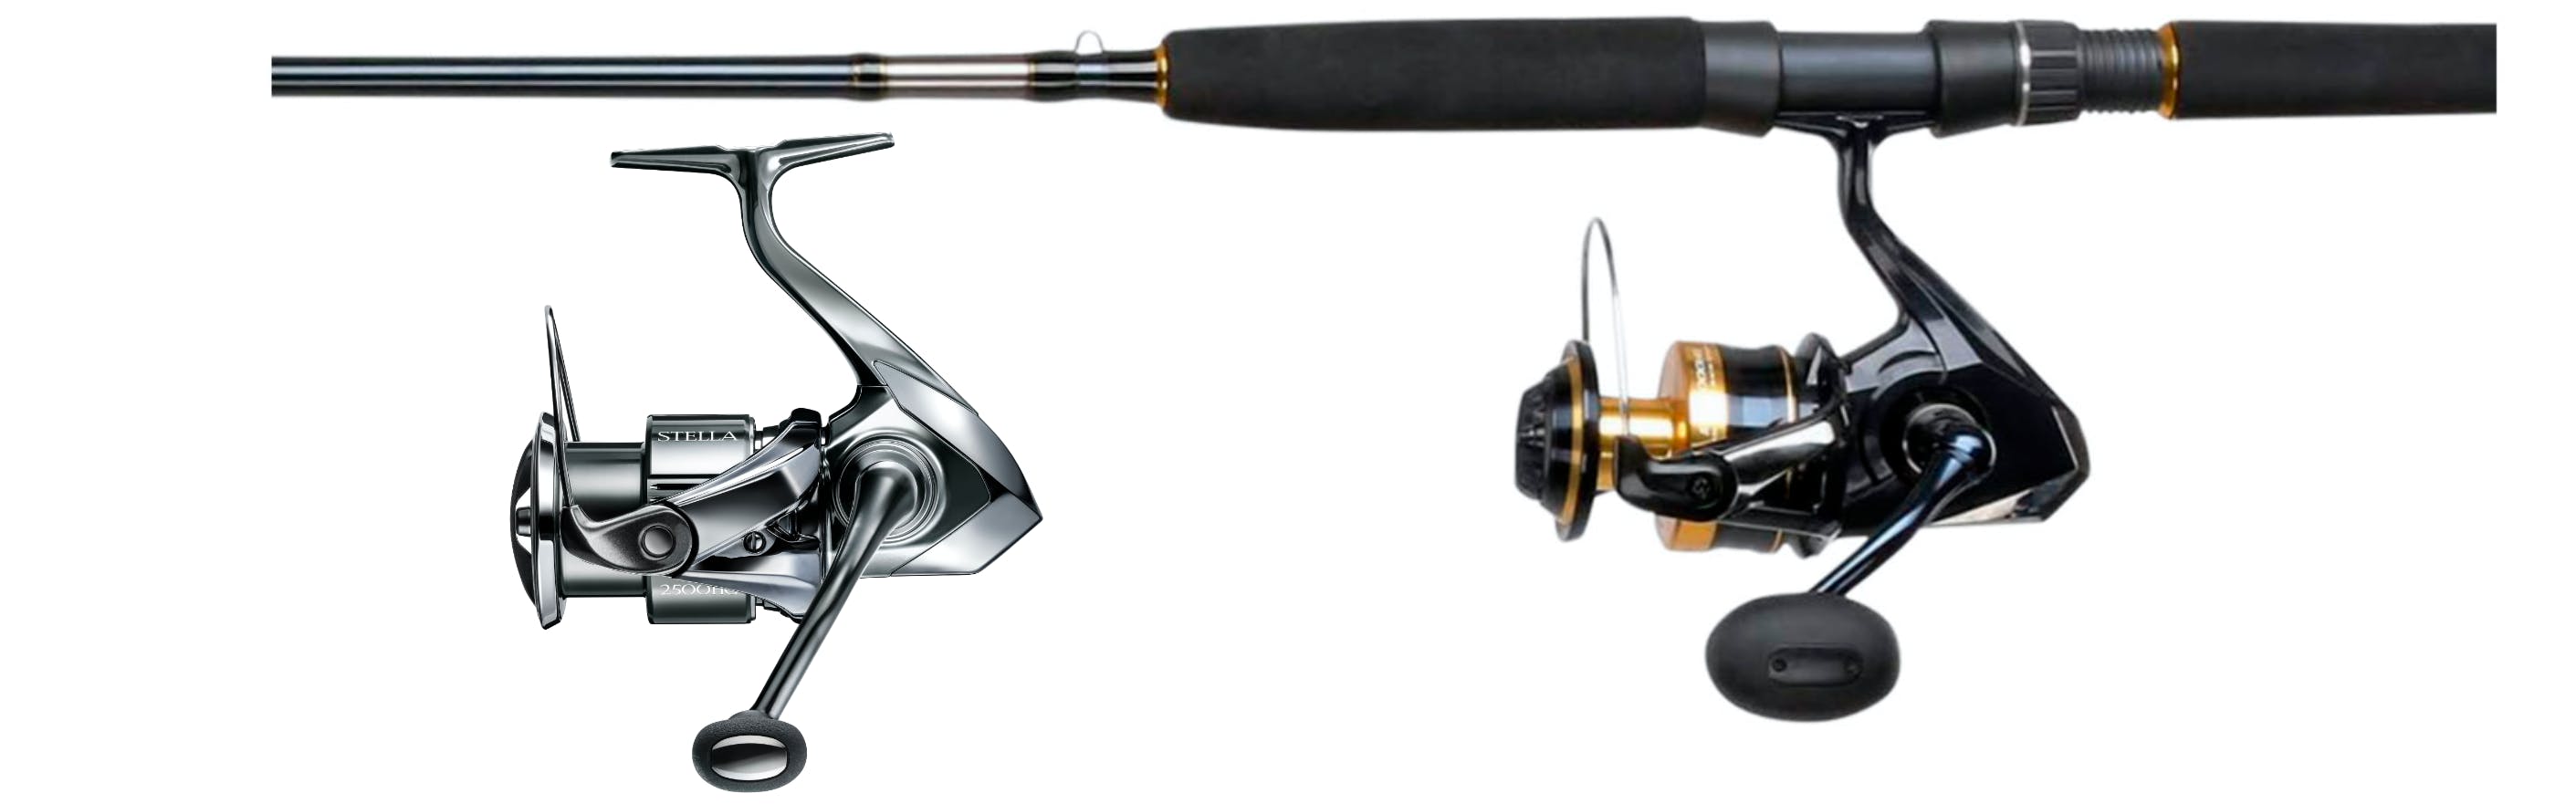 Best Saltwater Spinning Reels In 2020 – Get The Best Suggestion From Expert  